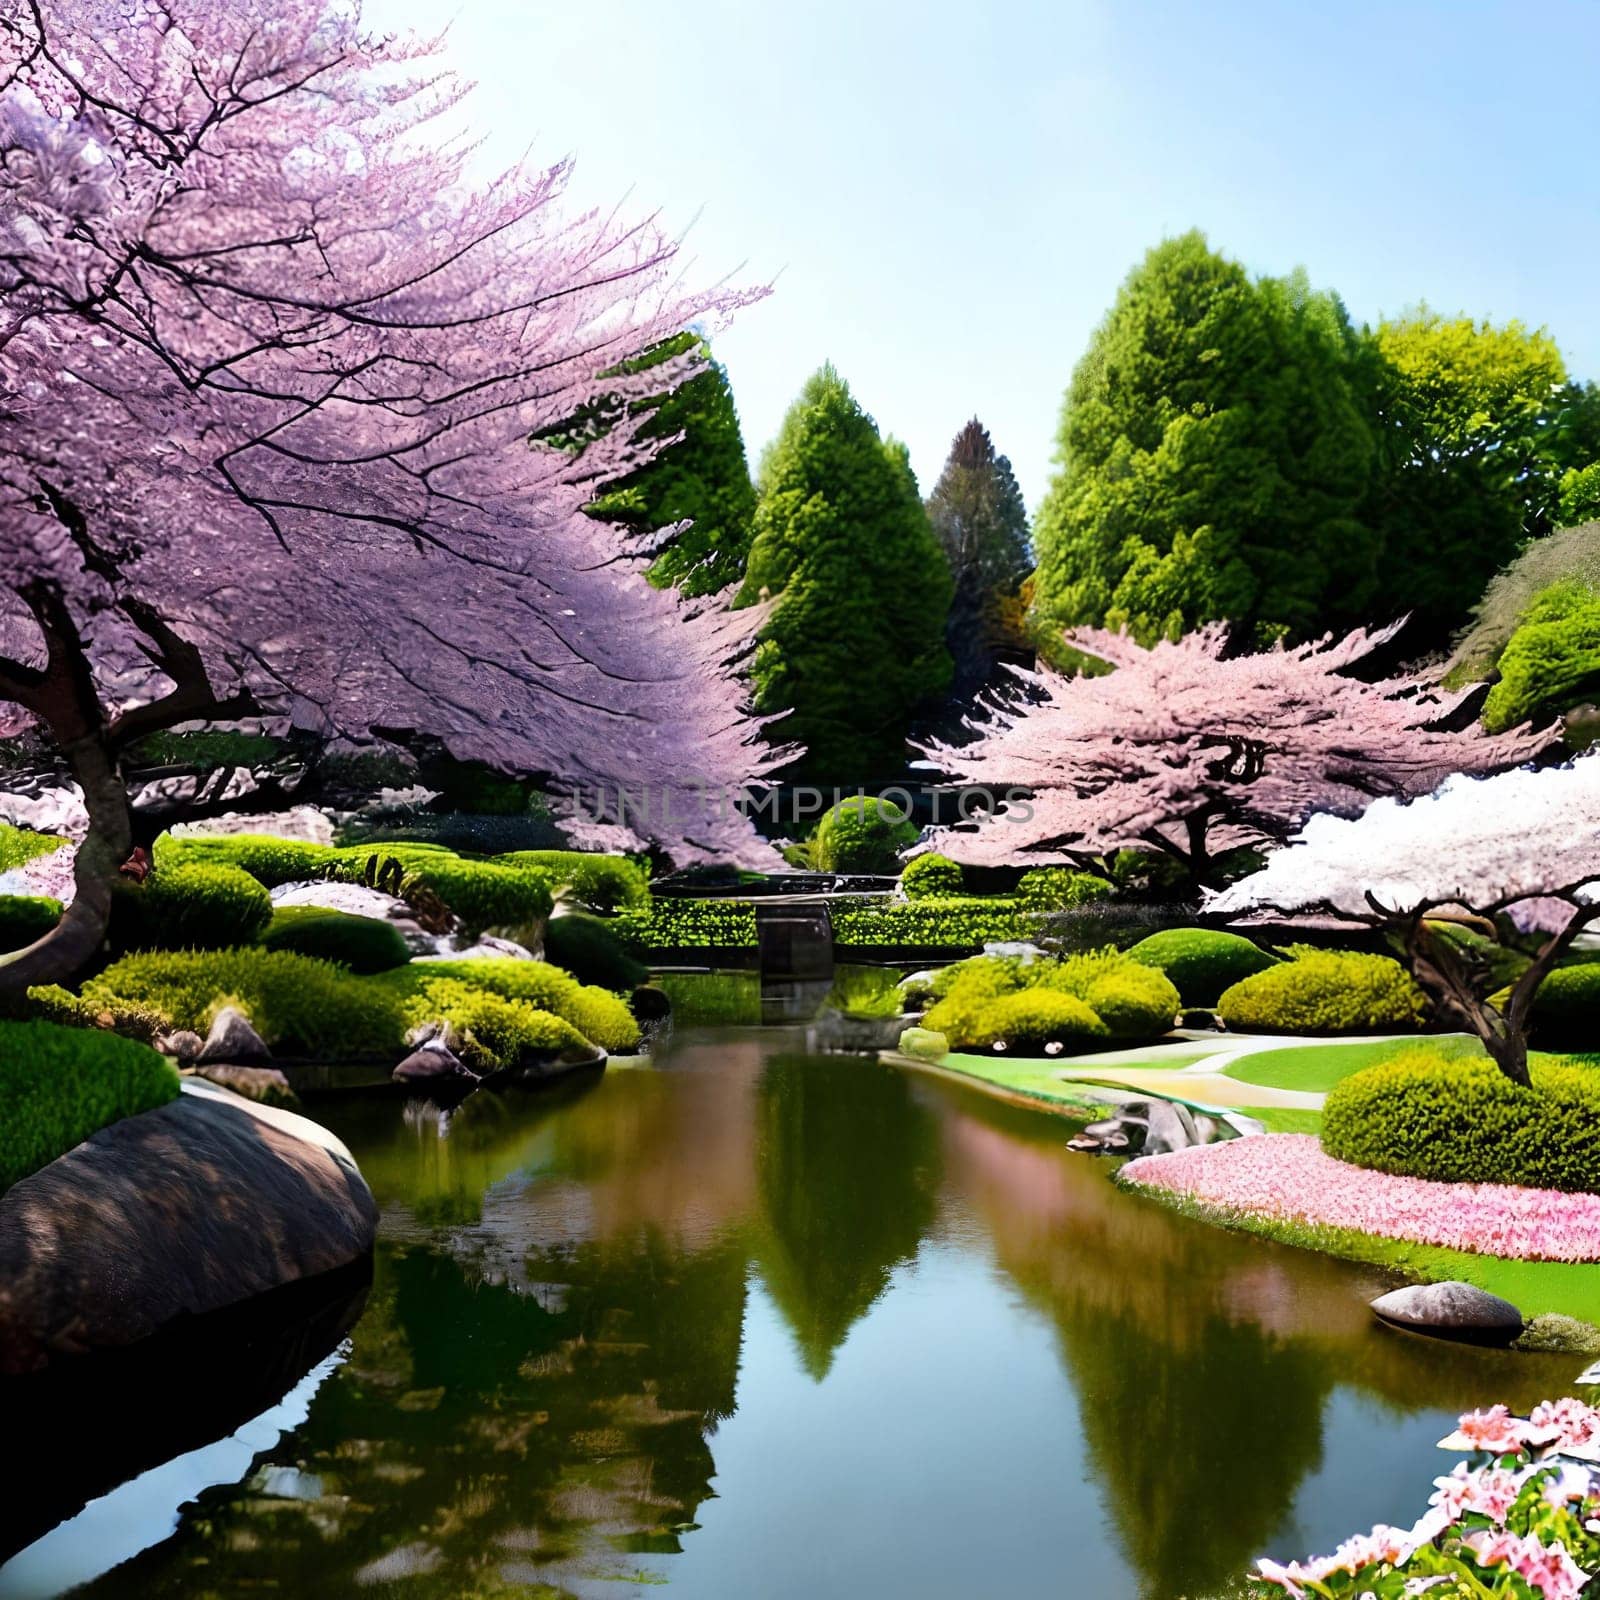 Tranquility of a serene botanical garden filled with blooming cherry blossoms. Panorama